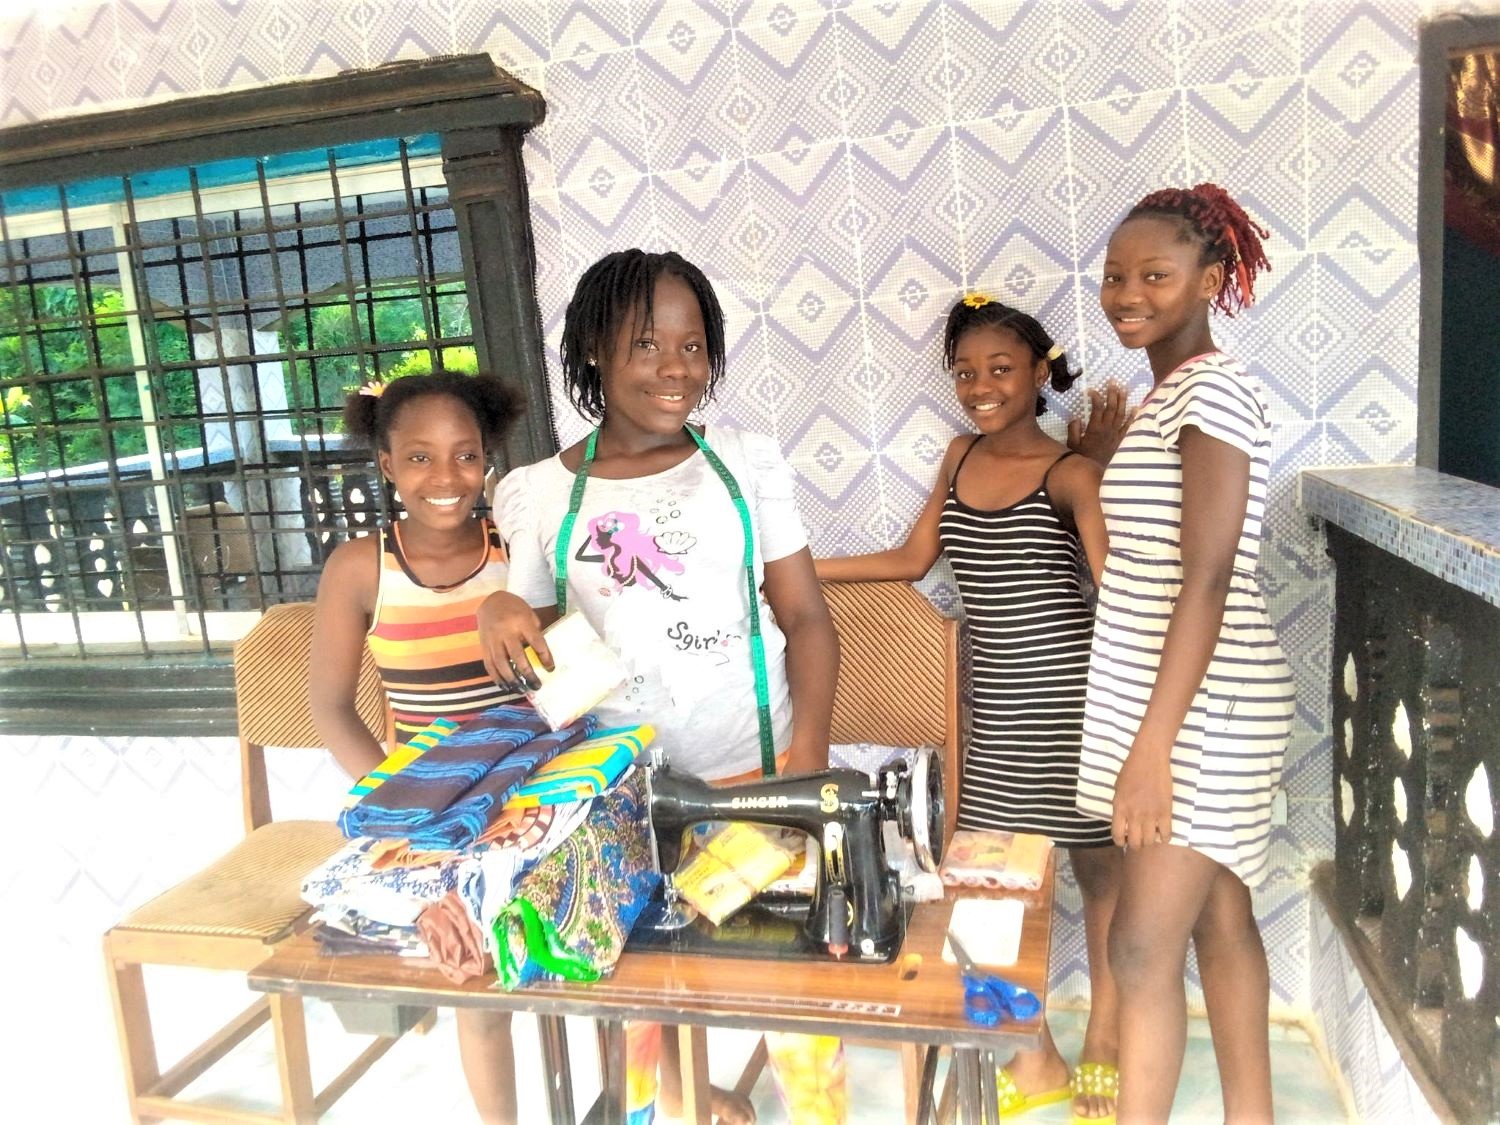 The girls were so amazed to see Jacqueline sew!  She made a dress for Linda during her visit. The girl who had difficulty learning was now a star in their eyes! God creates everyone with their own unique abilities.  Some shine in academic skills others excel in trades.